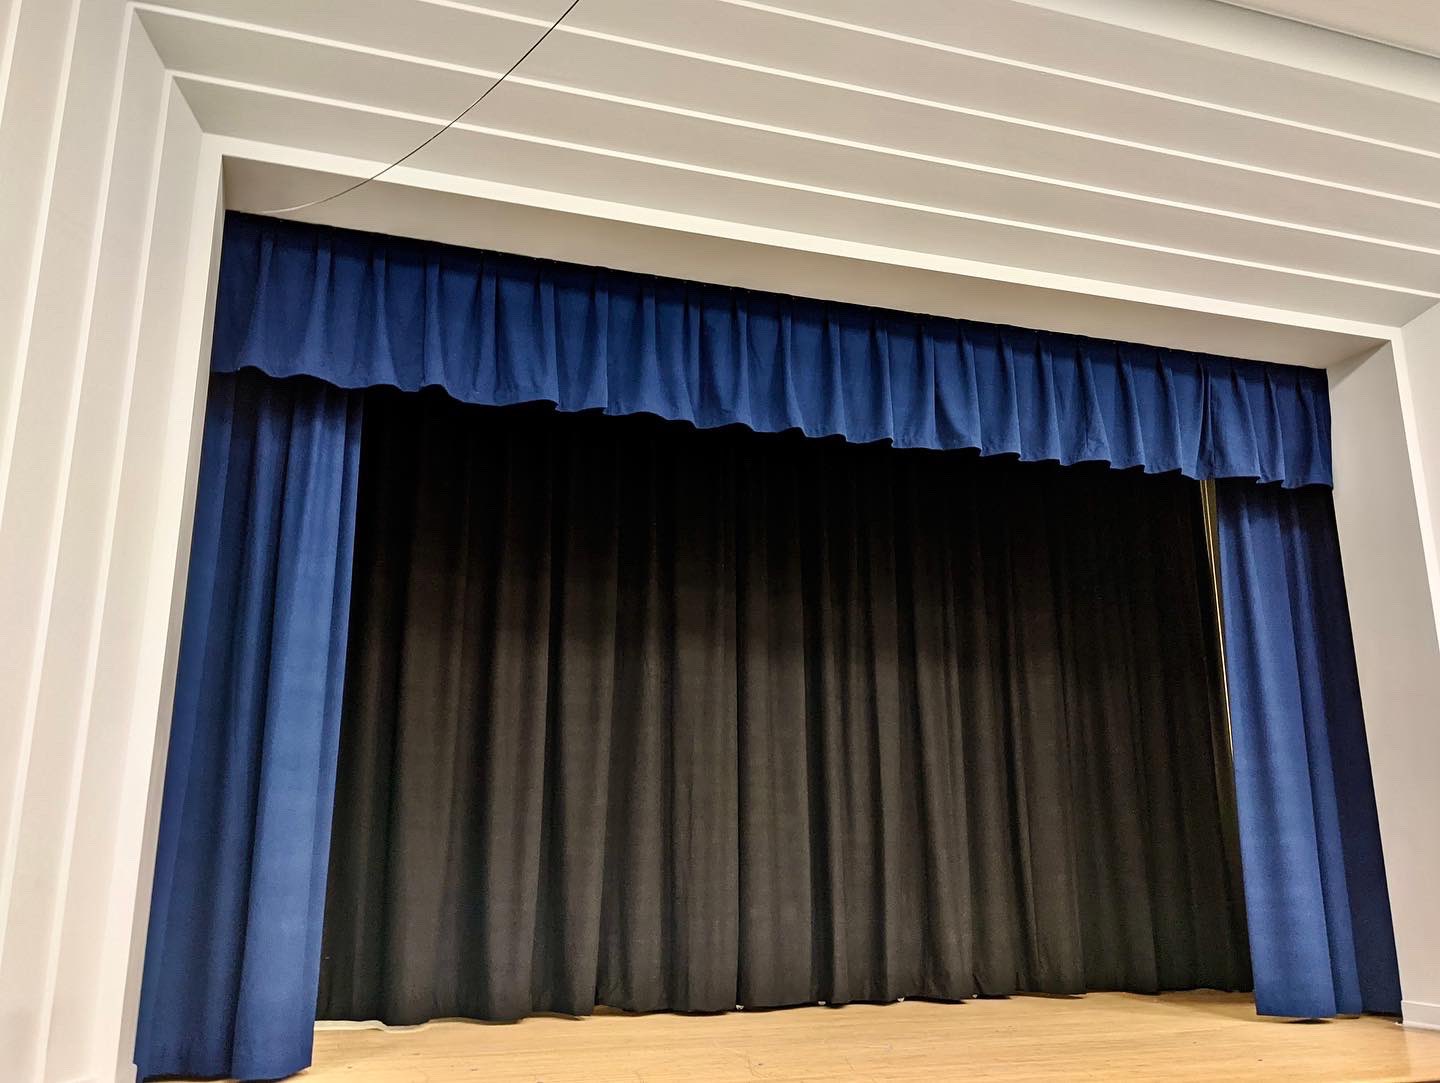 IWEISS on Twitter: "Another NYC school outfitted with IWEISS drapery and curtain track. #iweiss #curtains #drapery #curtaintrack #schoolcurtains #curtainsforschools #iweisscurtaintrack #performingarts #auditoriumcurtain #siteshots ...